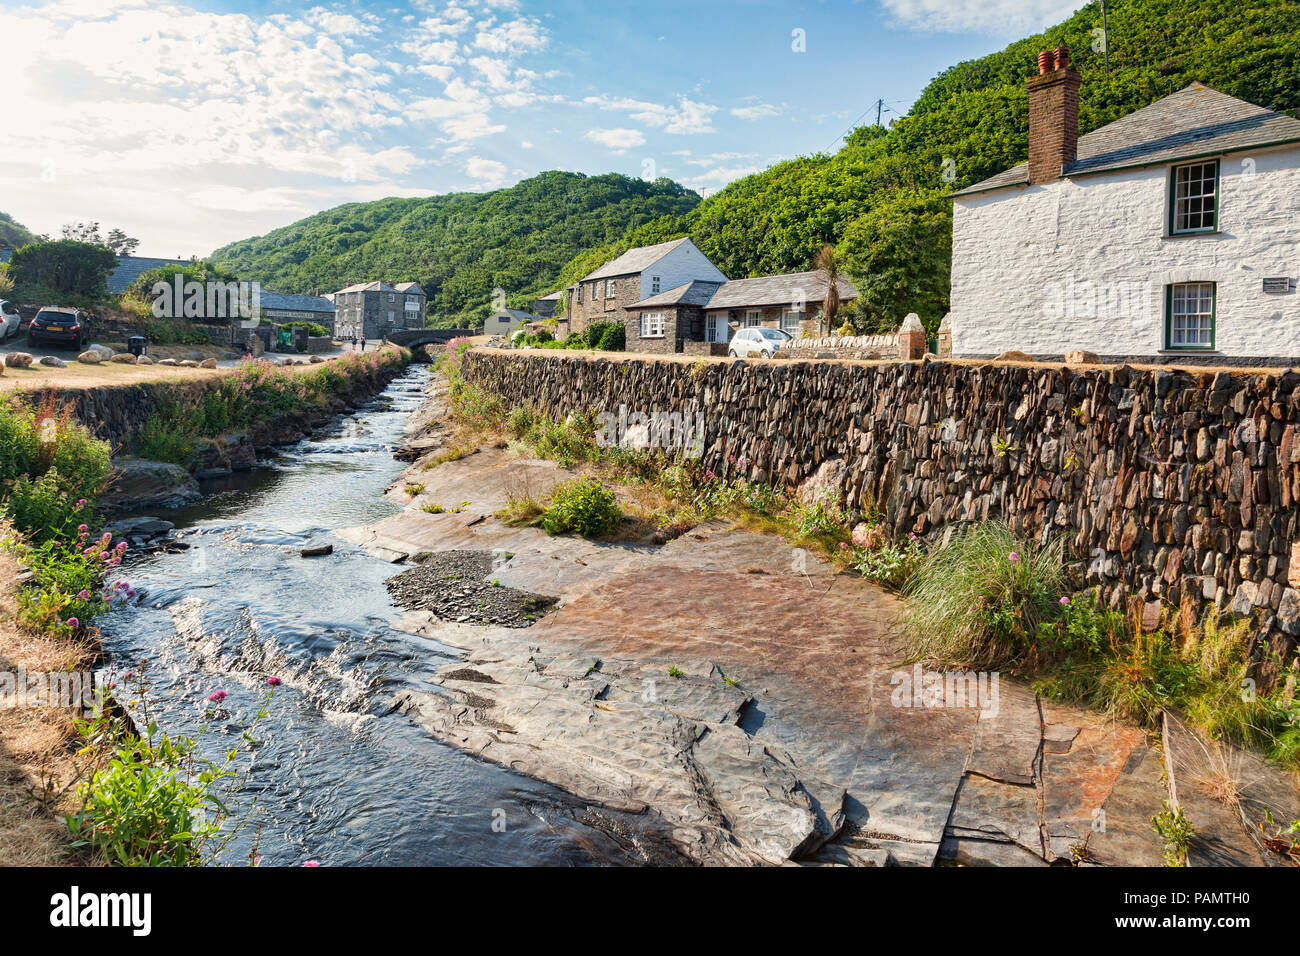 2 July 2018: Boscastle, North Cornwall, UK - the coastal village of Boscastle, with cottages and the River Valency running through it with a slate str Stock Photo